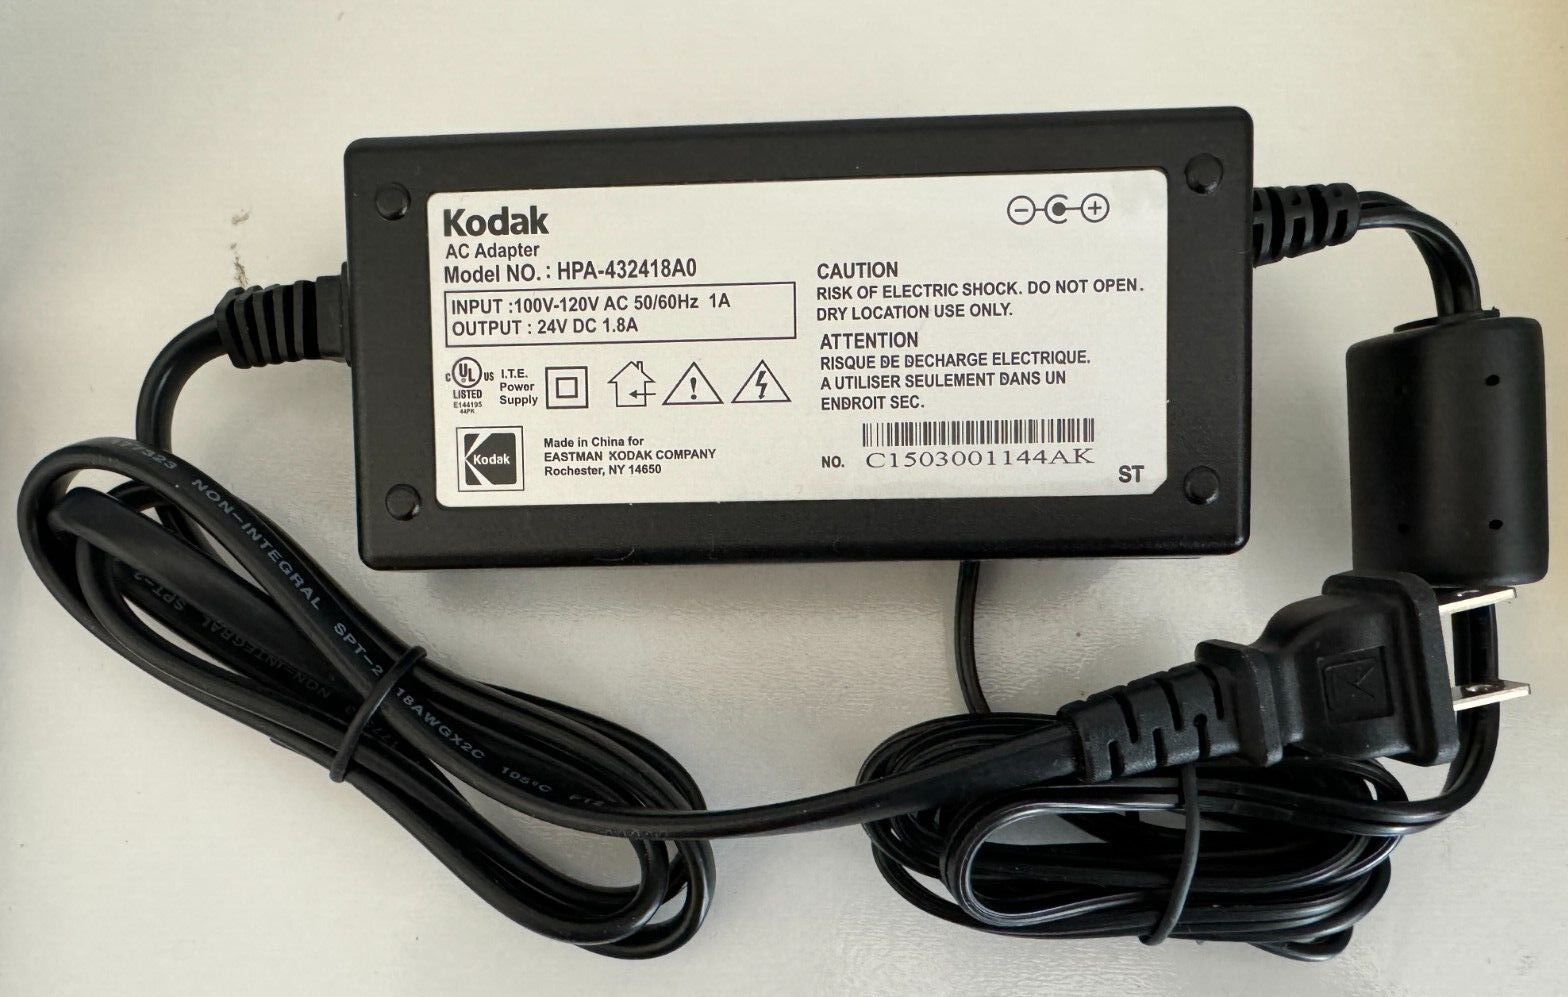 Kodak AC Adapter Model HPA-432418A0 with Output 24V DC 1.8A Works